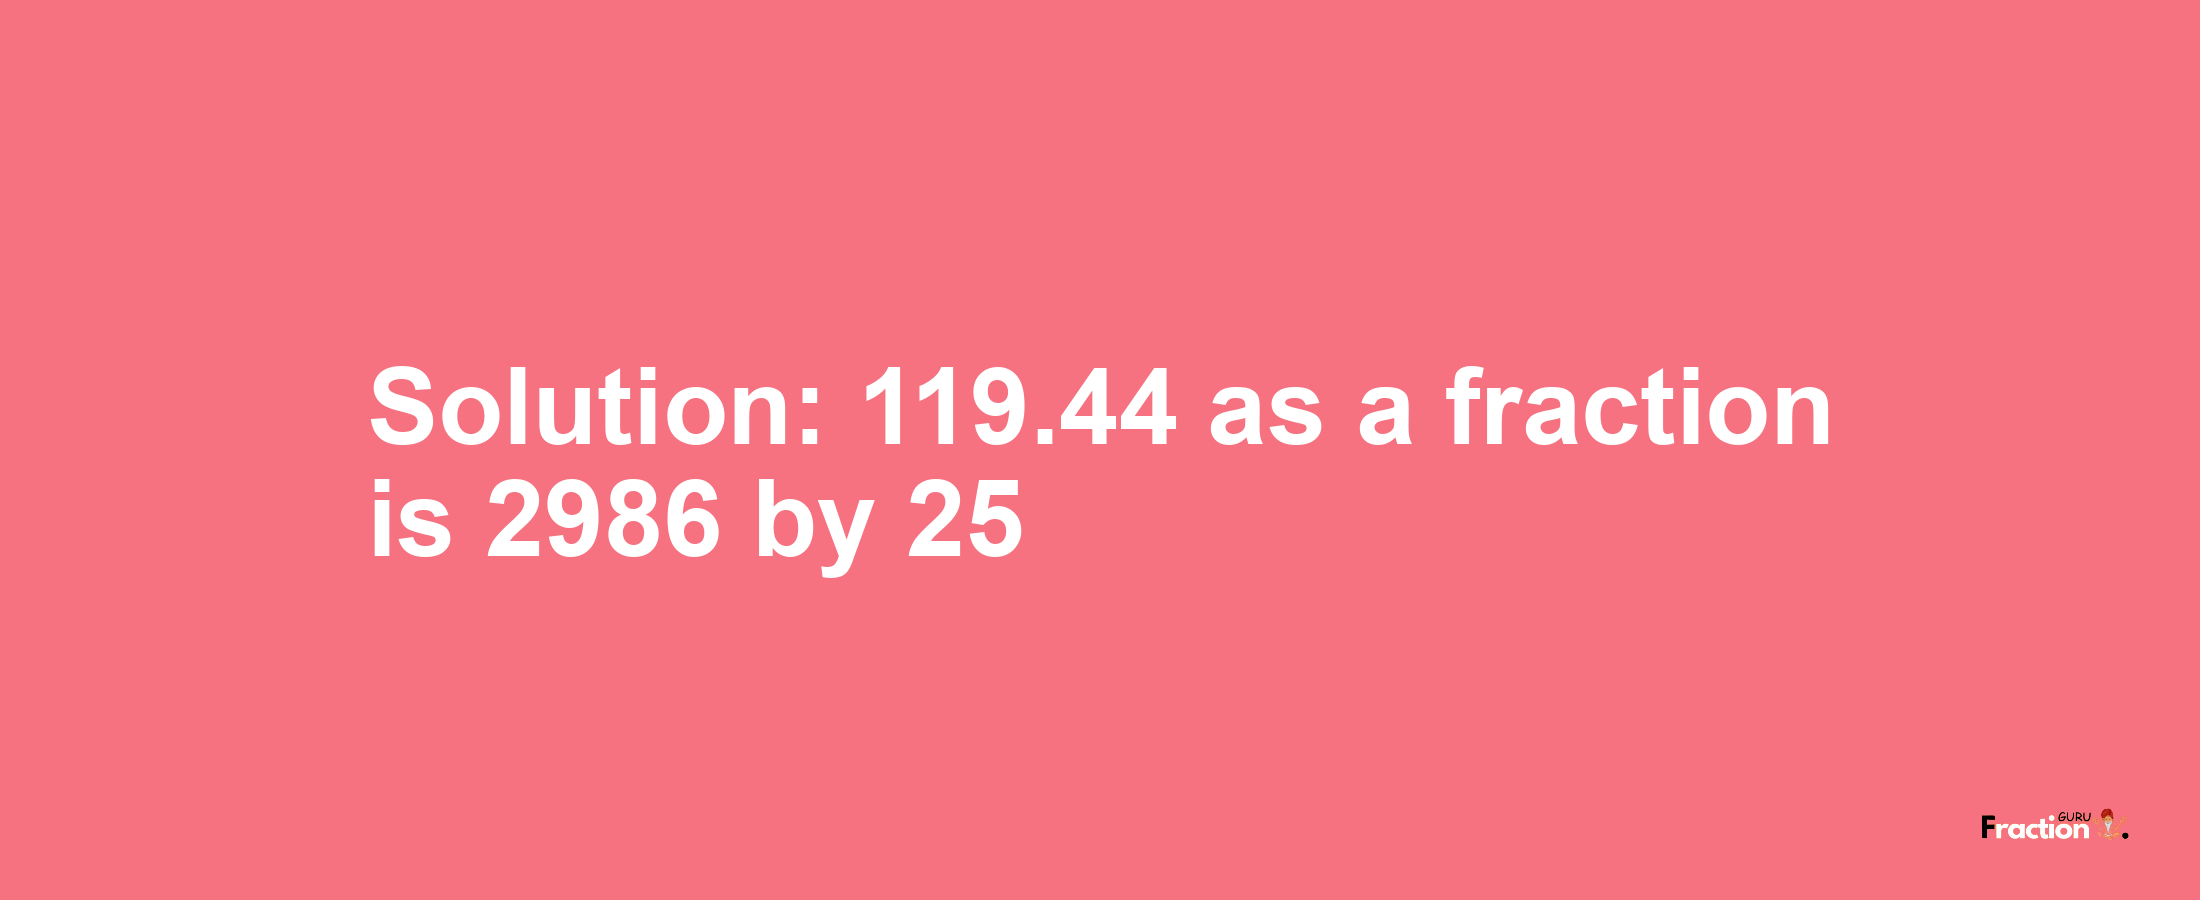 Solution:119.44 as a fraction is 2986/25